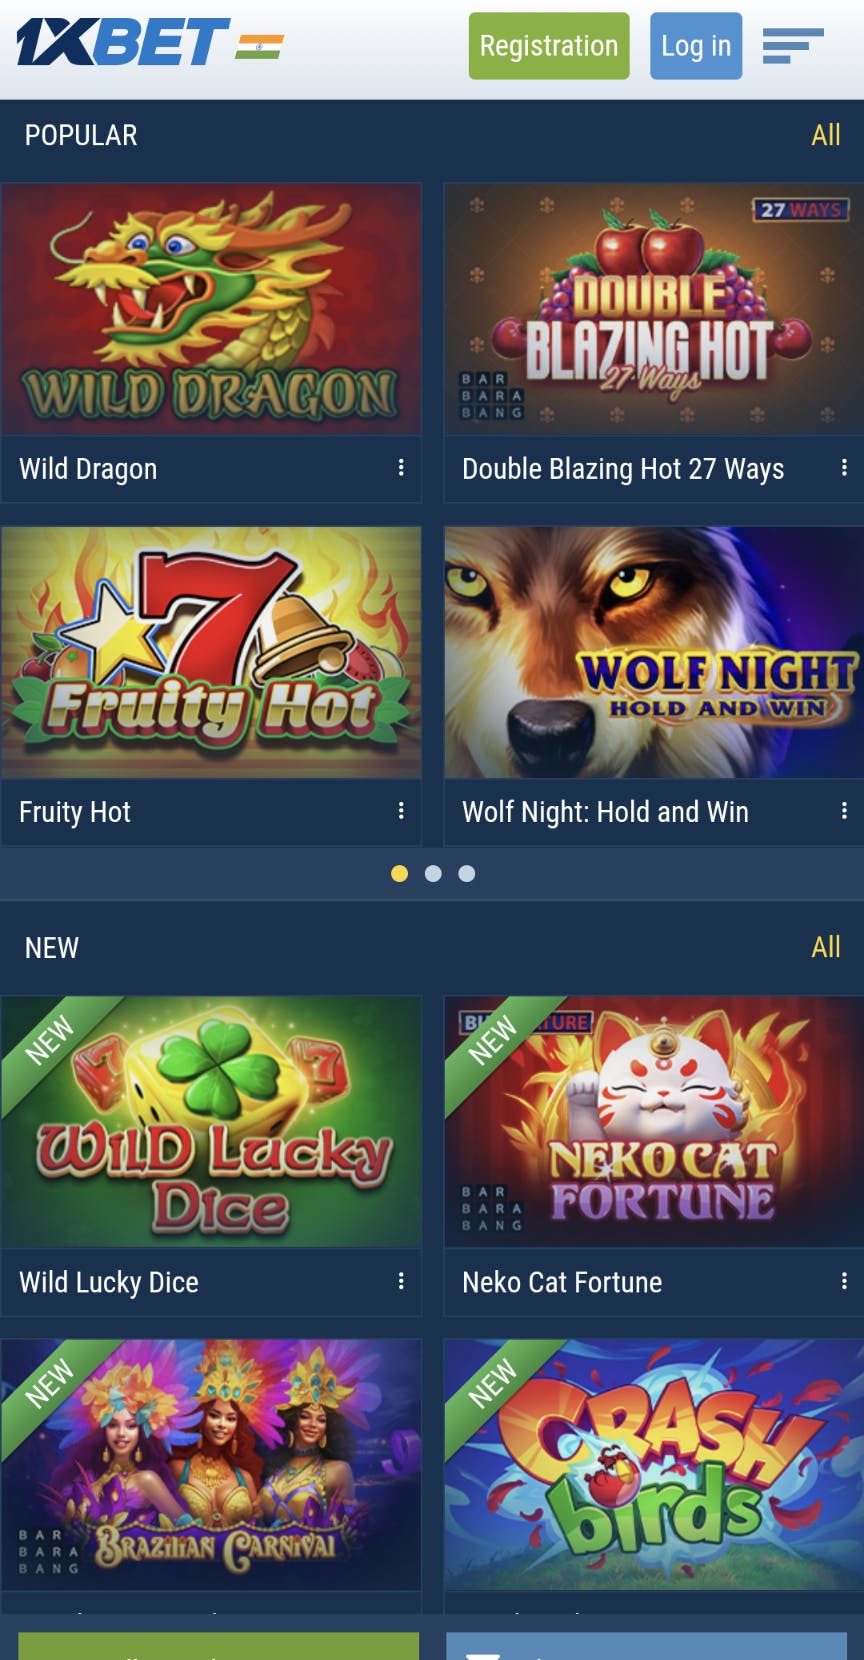 1xBet app popular casino games and new casino games.